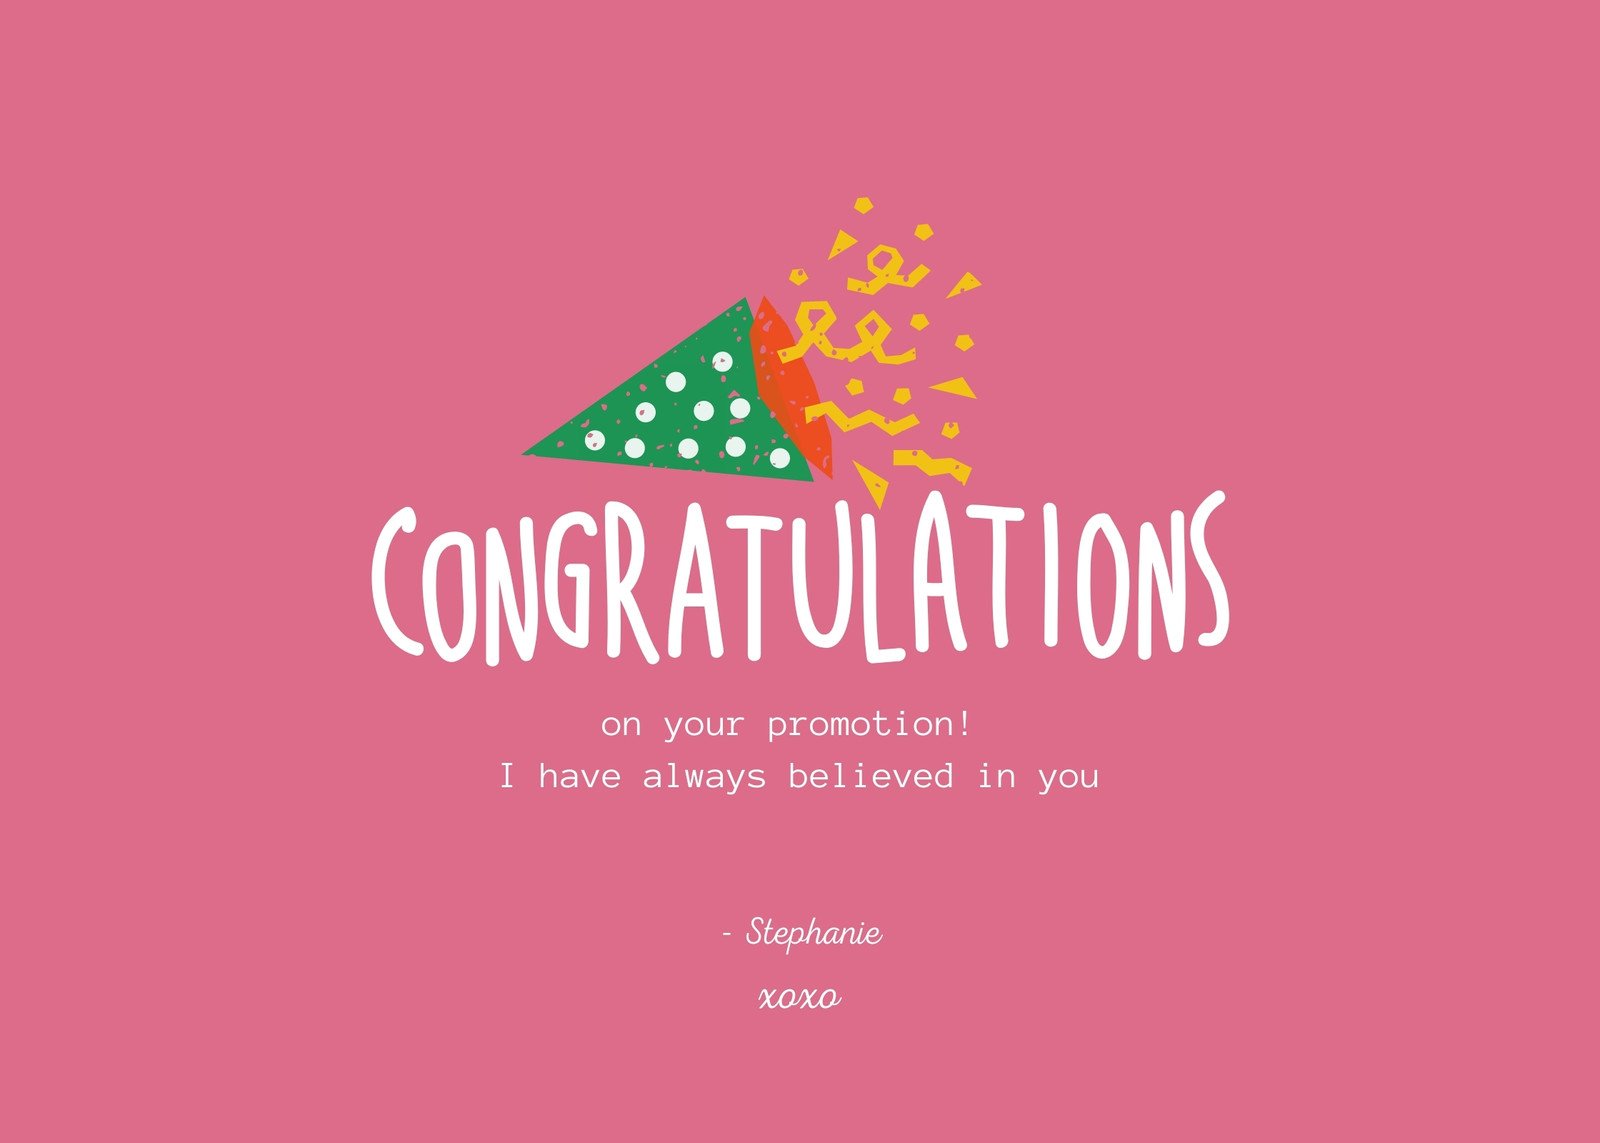 congratulations on your promotion animation